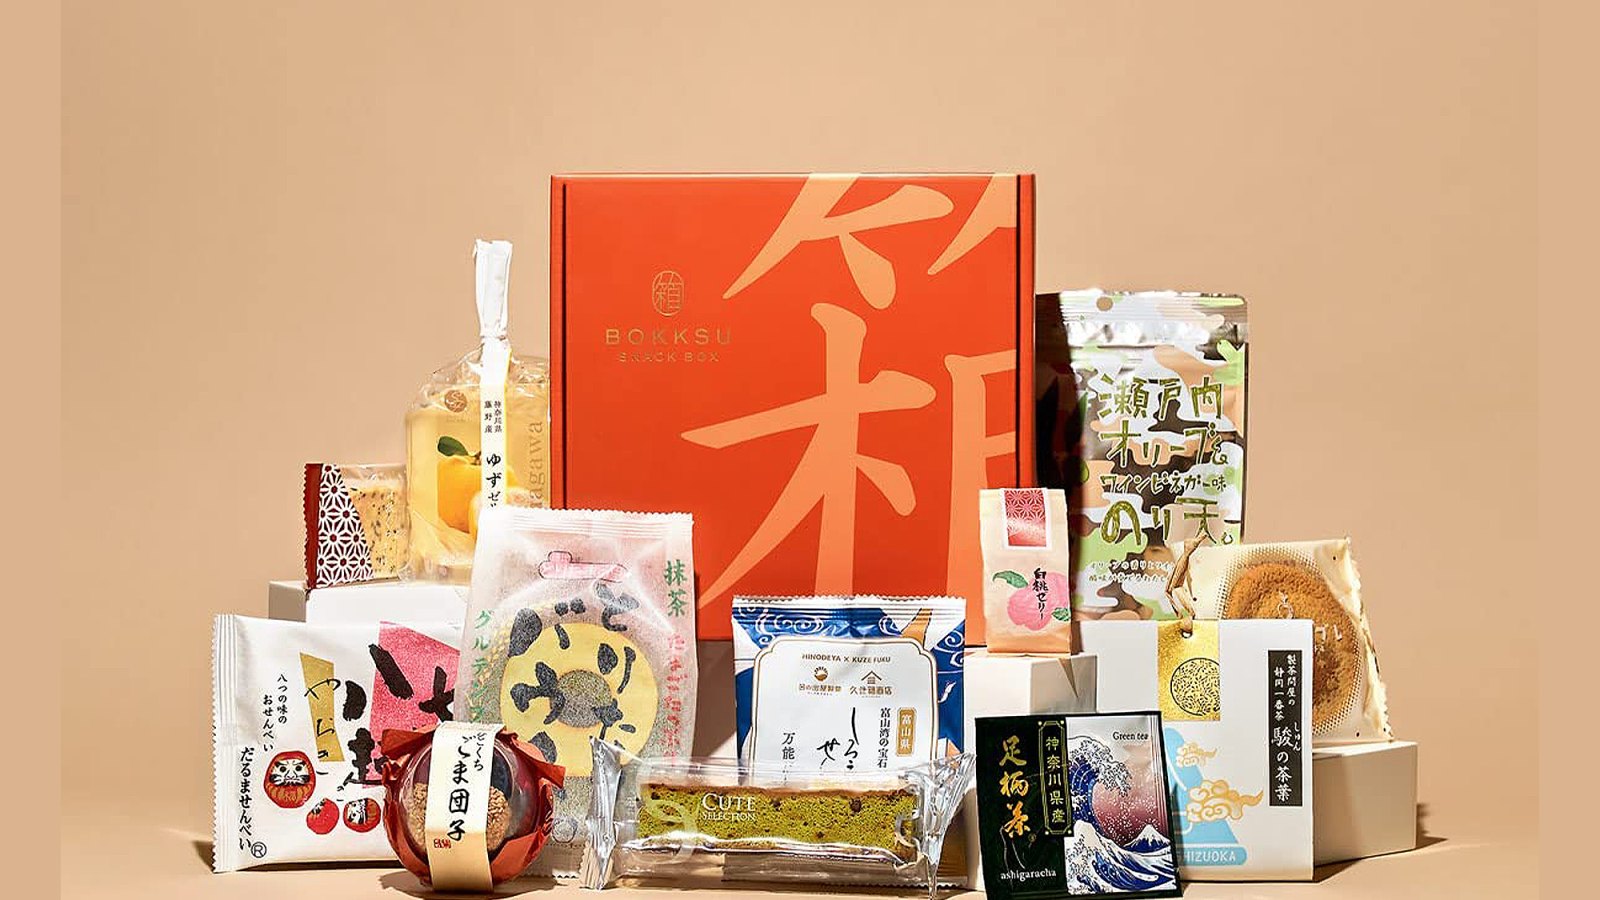 Bokksu - Authentic Japanese Snack & Candy Subscription